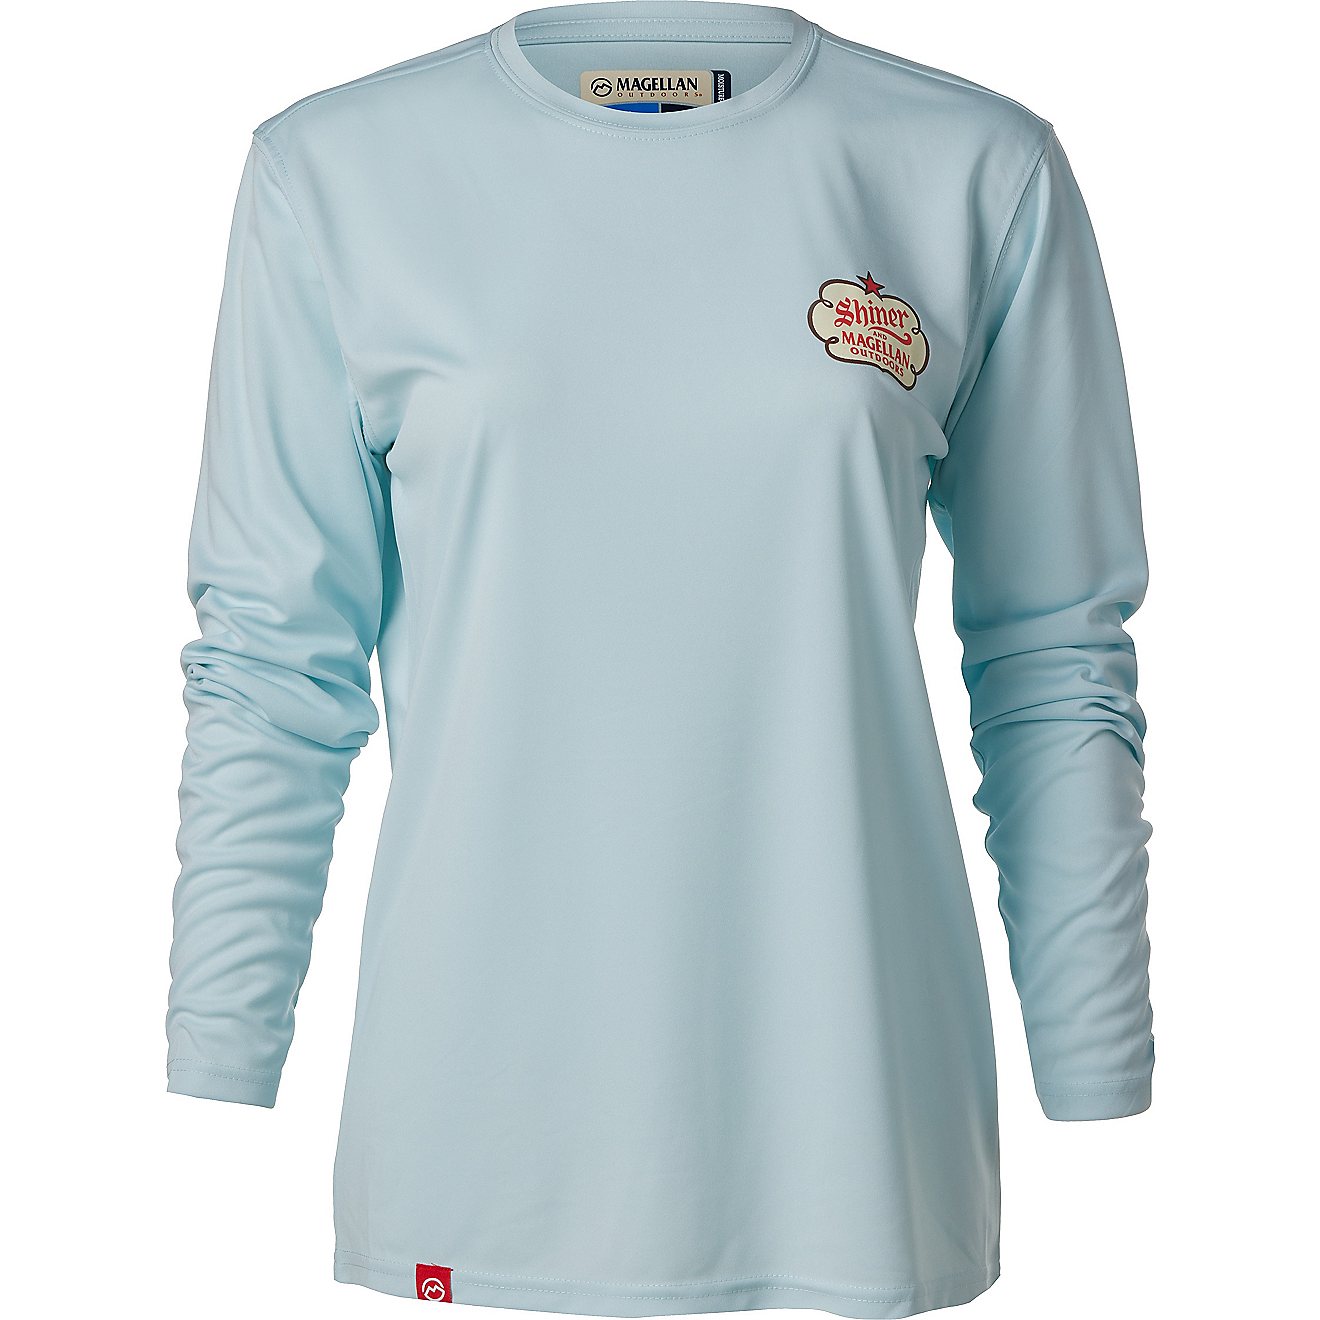 Magellan Outdoors Shiner Women's Campfire Graphic Long Sleeve T-shirt                                                            - view number 2